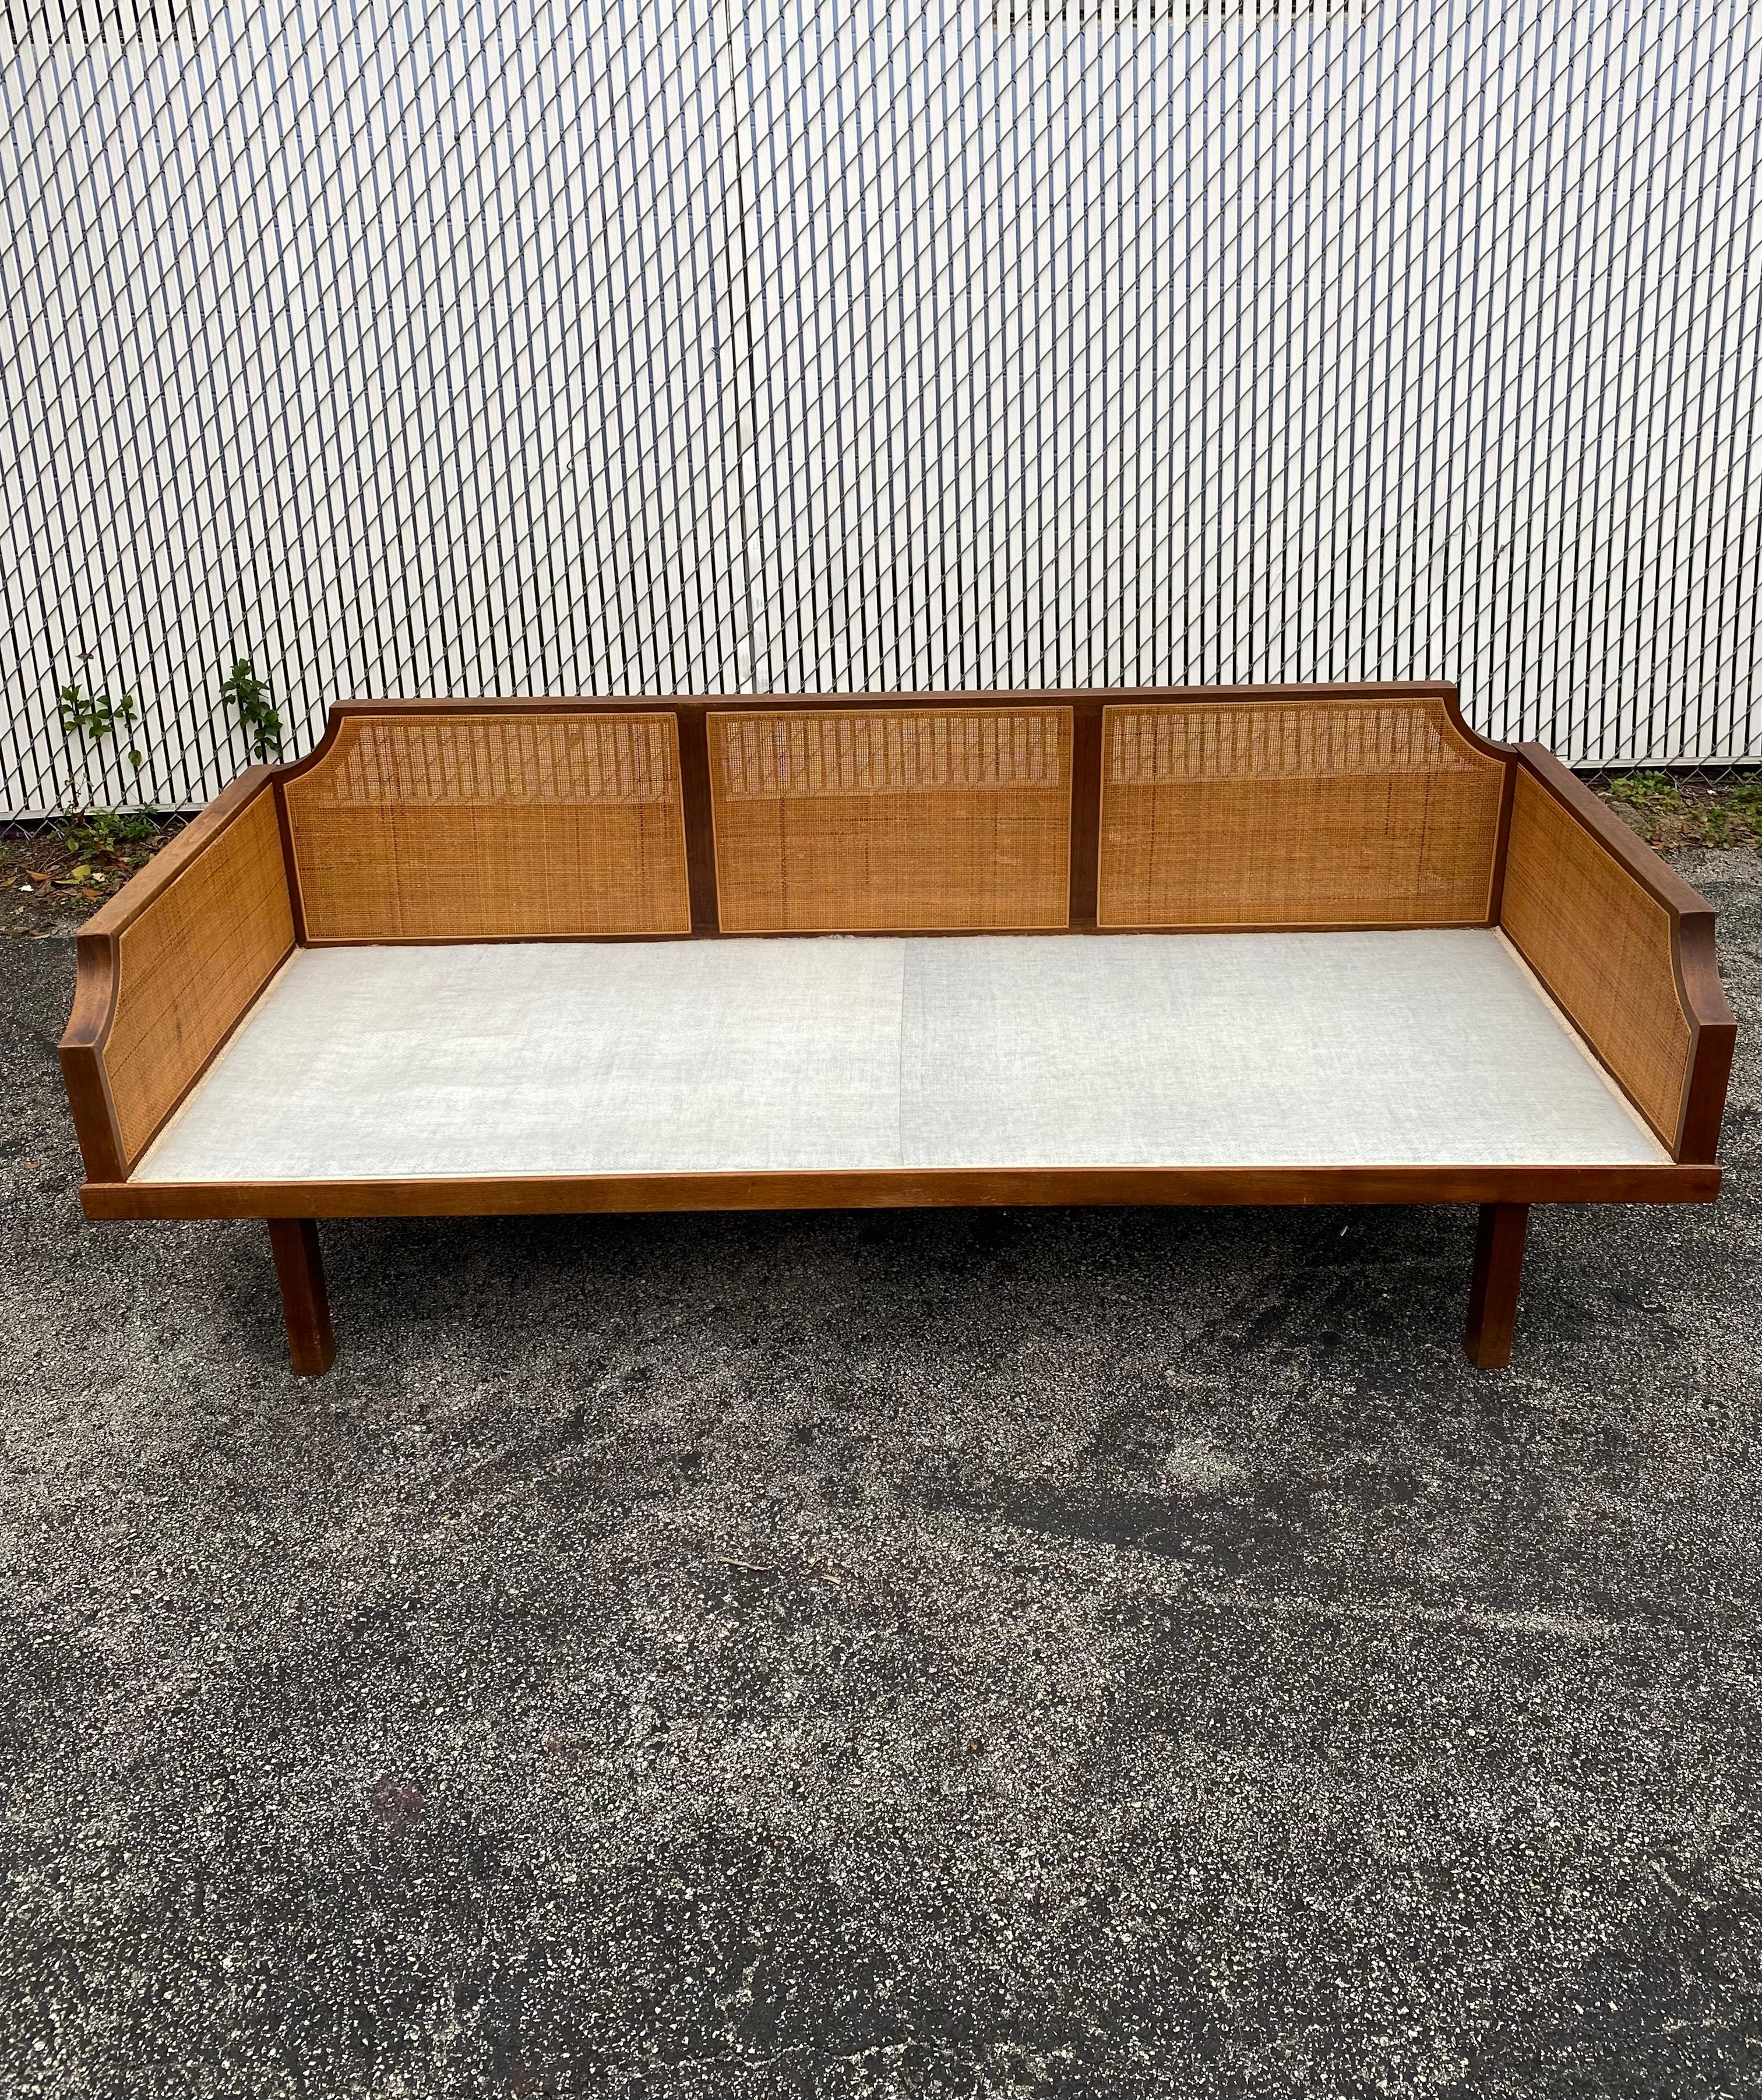 1960s Mid-Century Teak Cane Sofa or Daybed 2